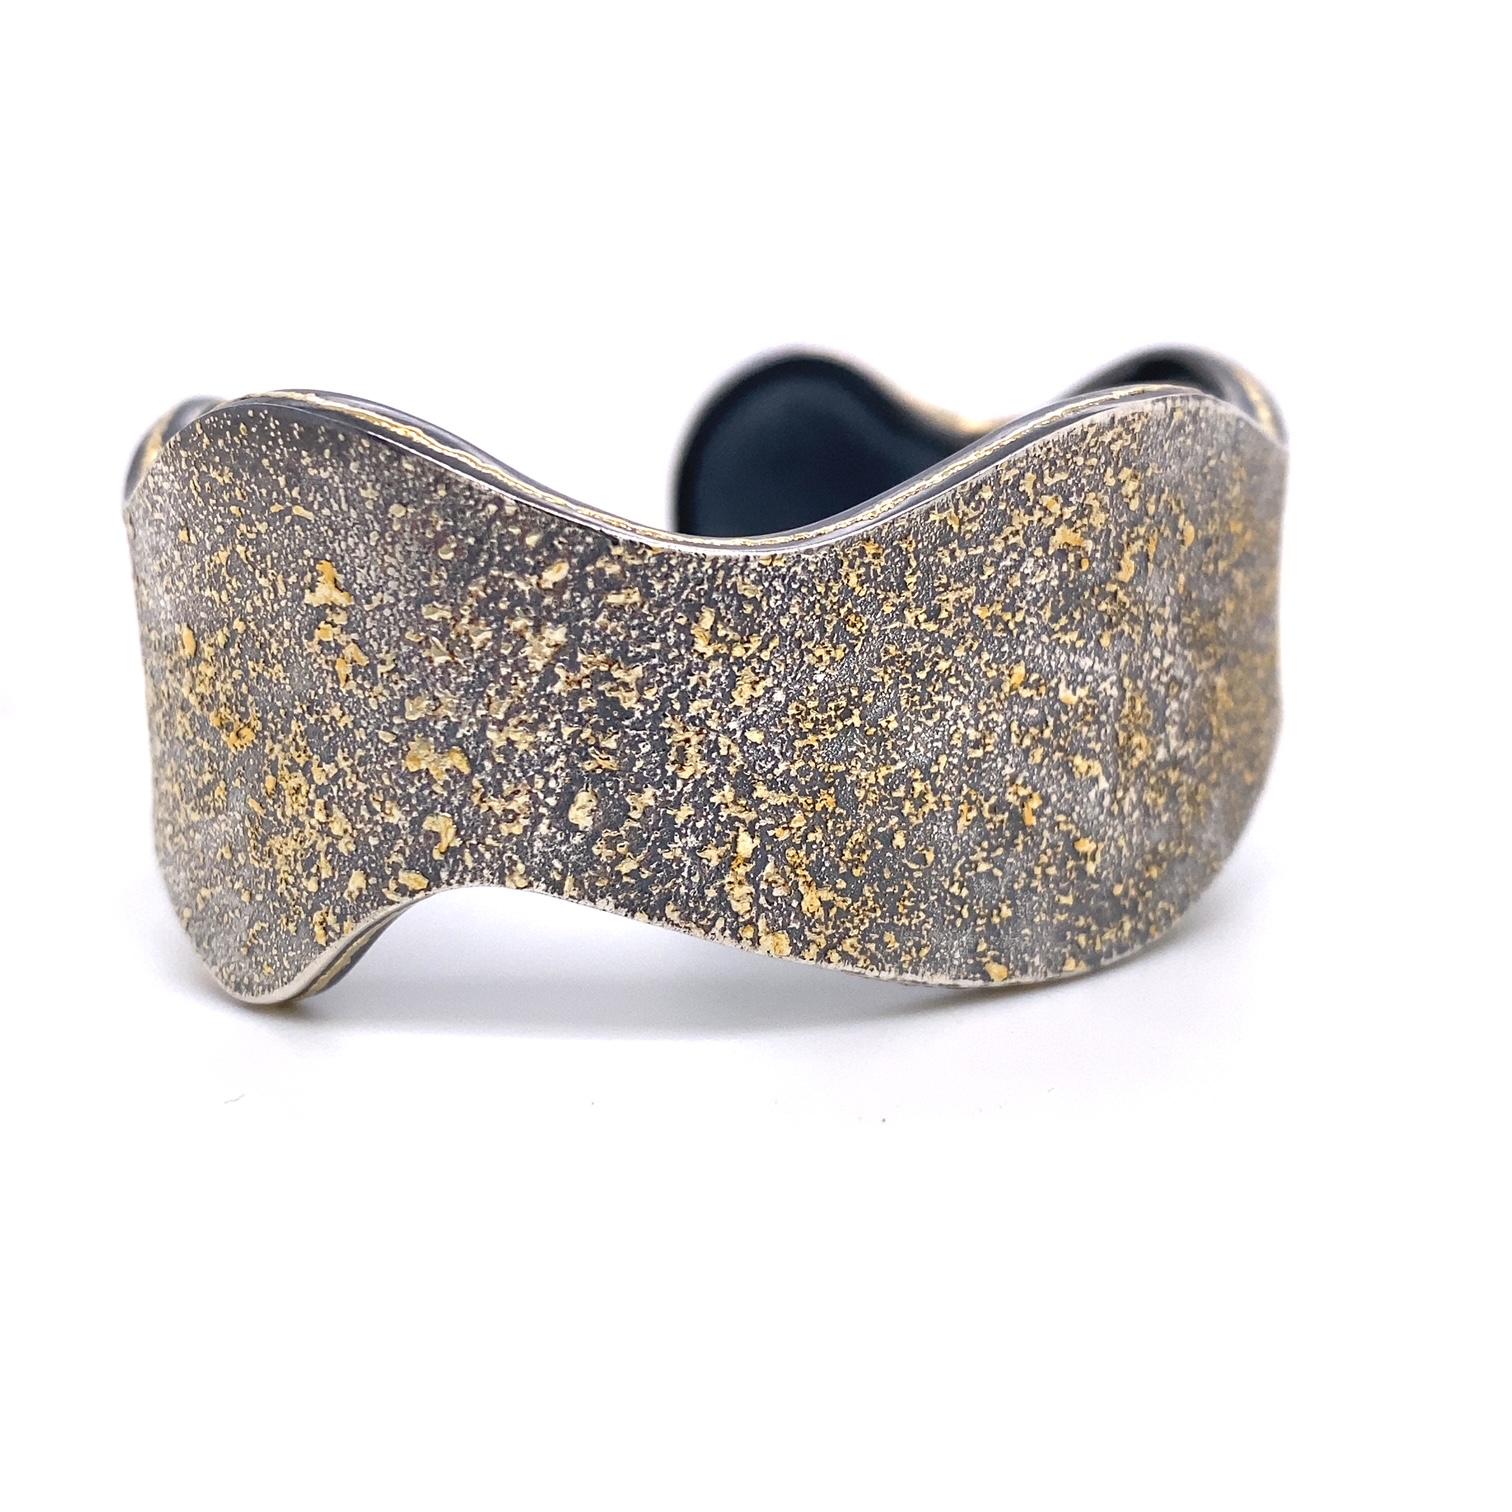 An oxidized sterling silver cuff with 24k gold fairy dust and 18k yellow gold accents. Titled 